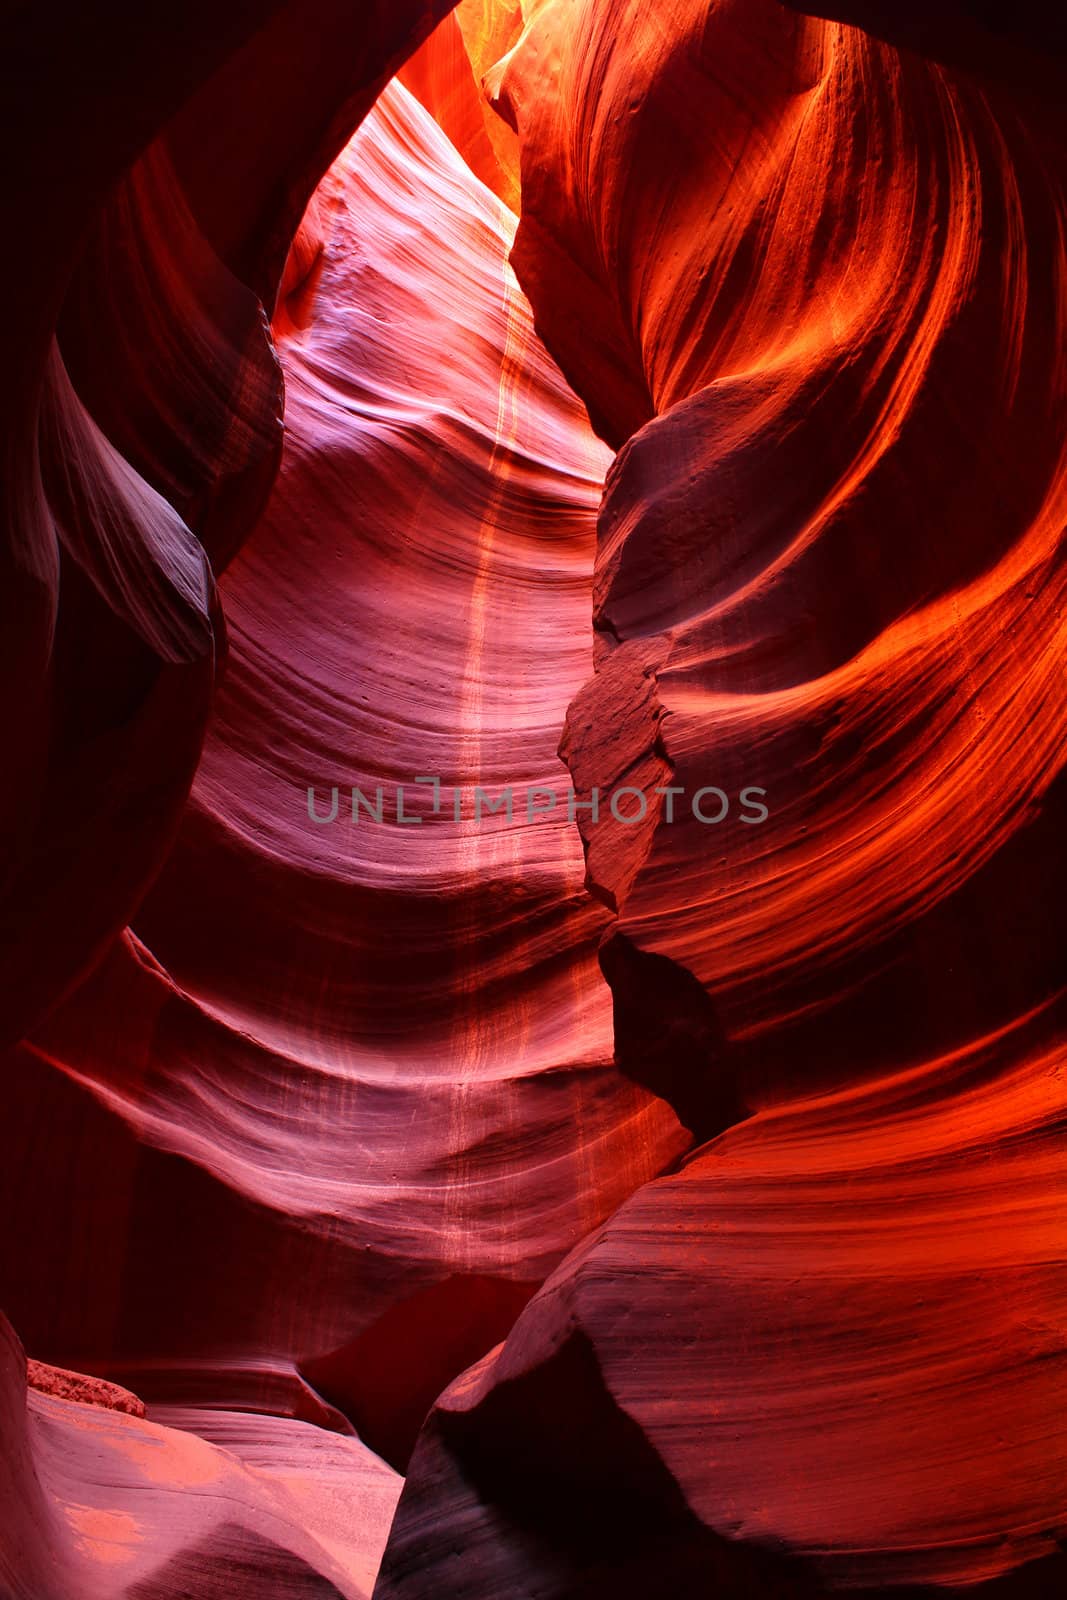 Vivid red colors of Antelope Canyon in southwest United States.